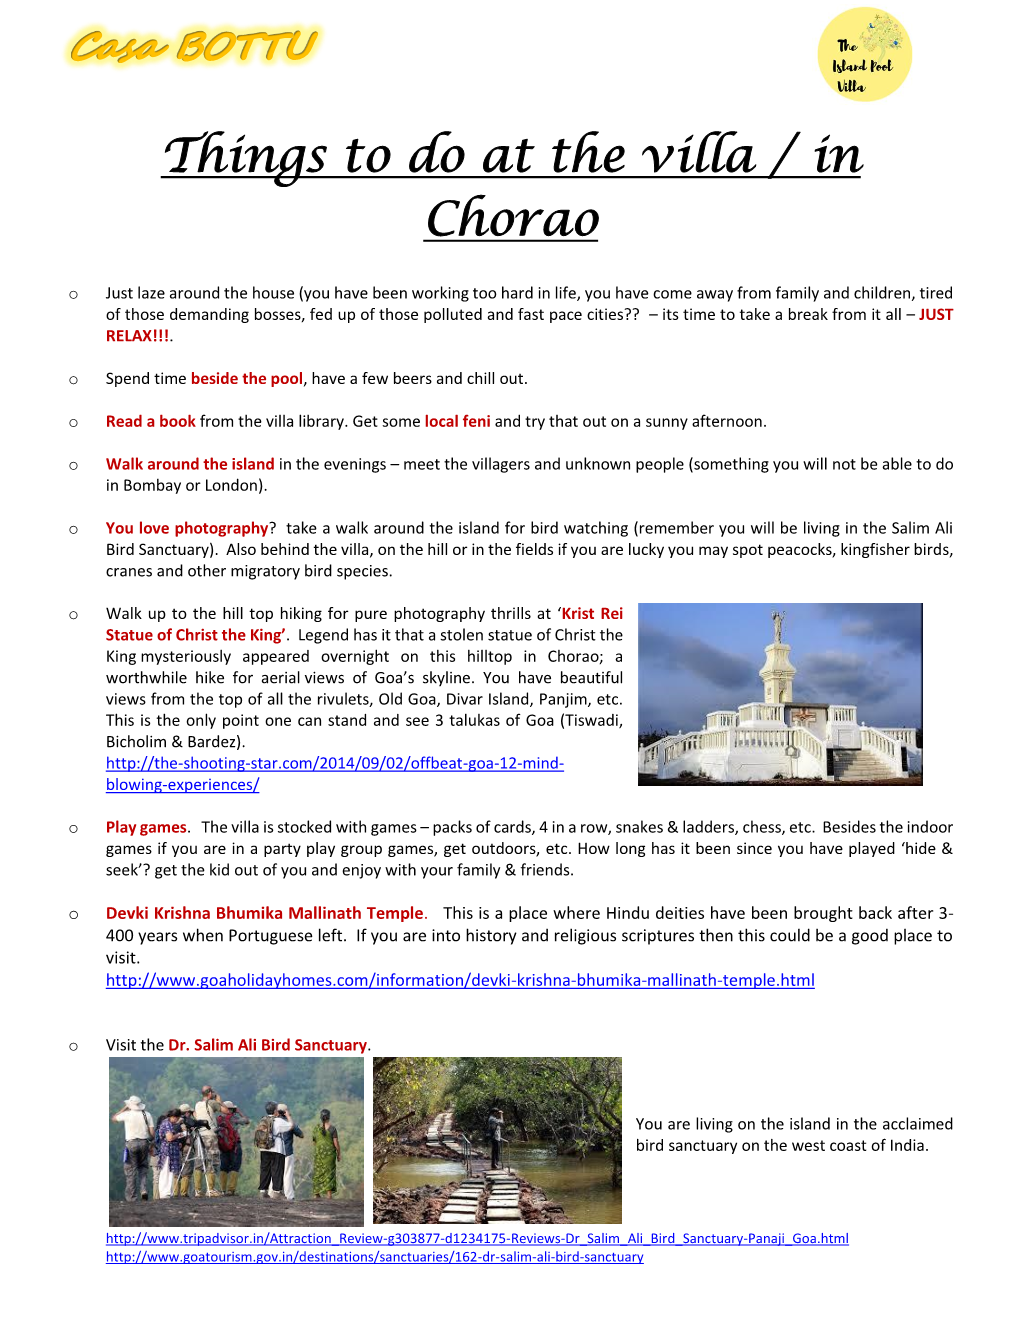 Things to Do at the Villa / in Chorao